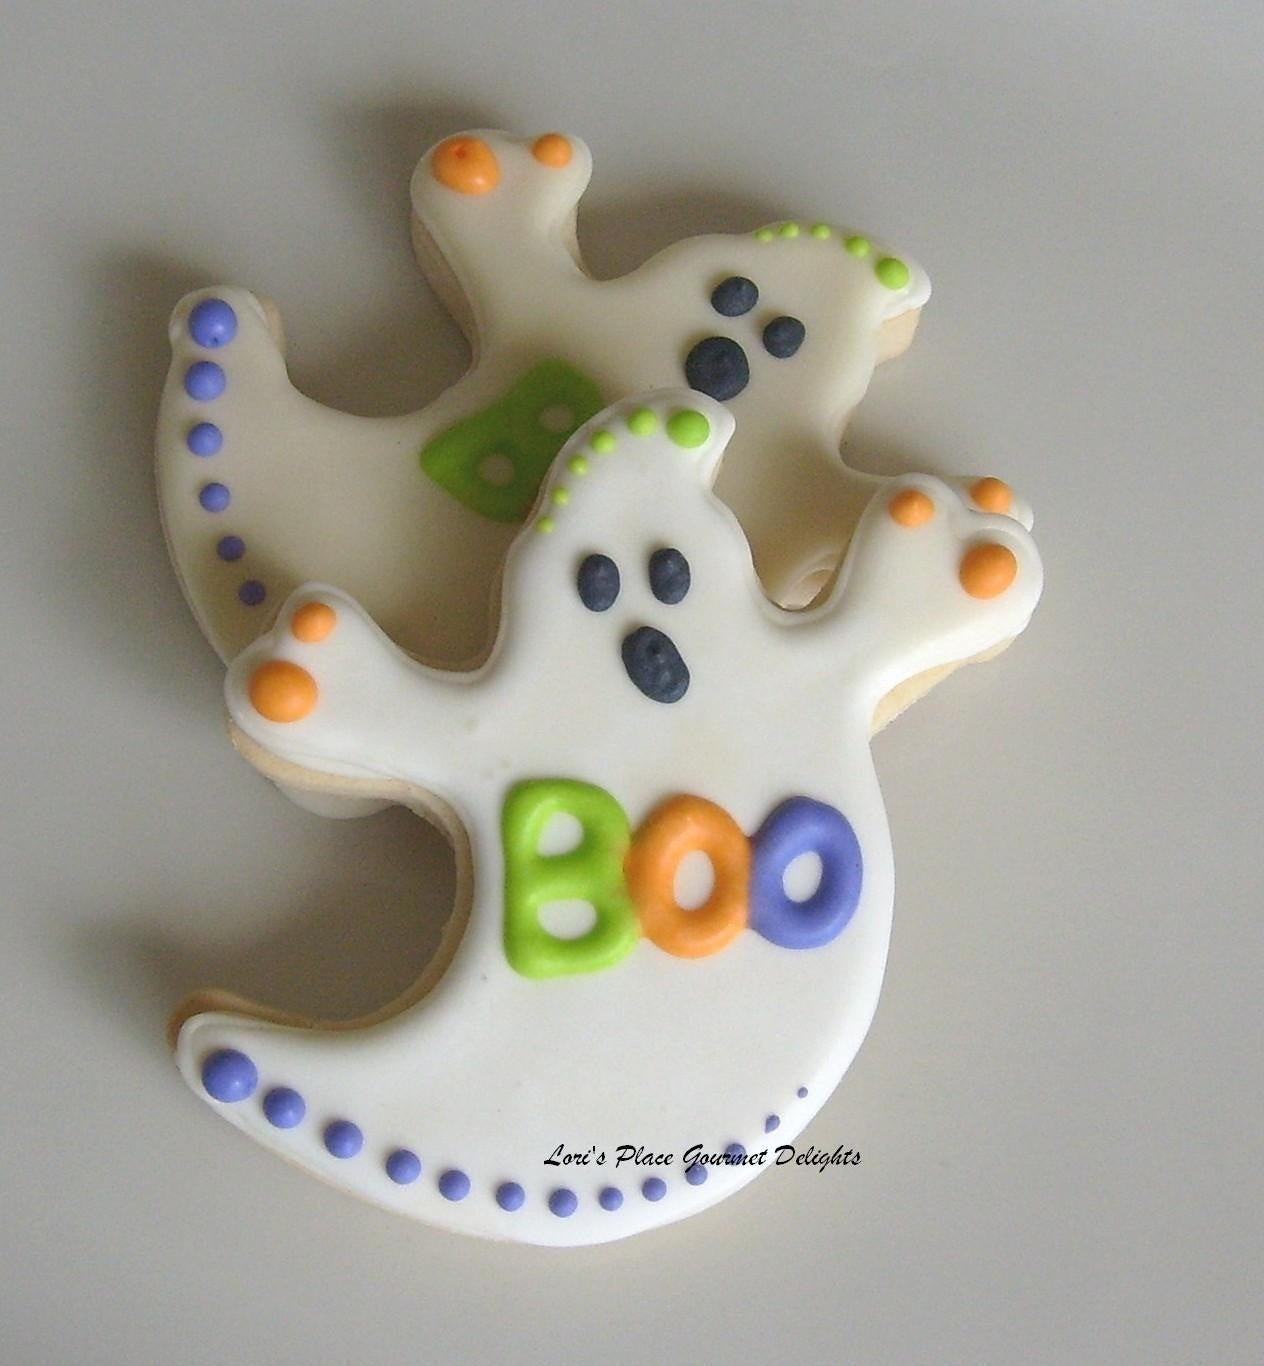 Halloween Decorated Cookies
 Ghost Decorated Cookie Favors Halloween Cookie Favors 1